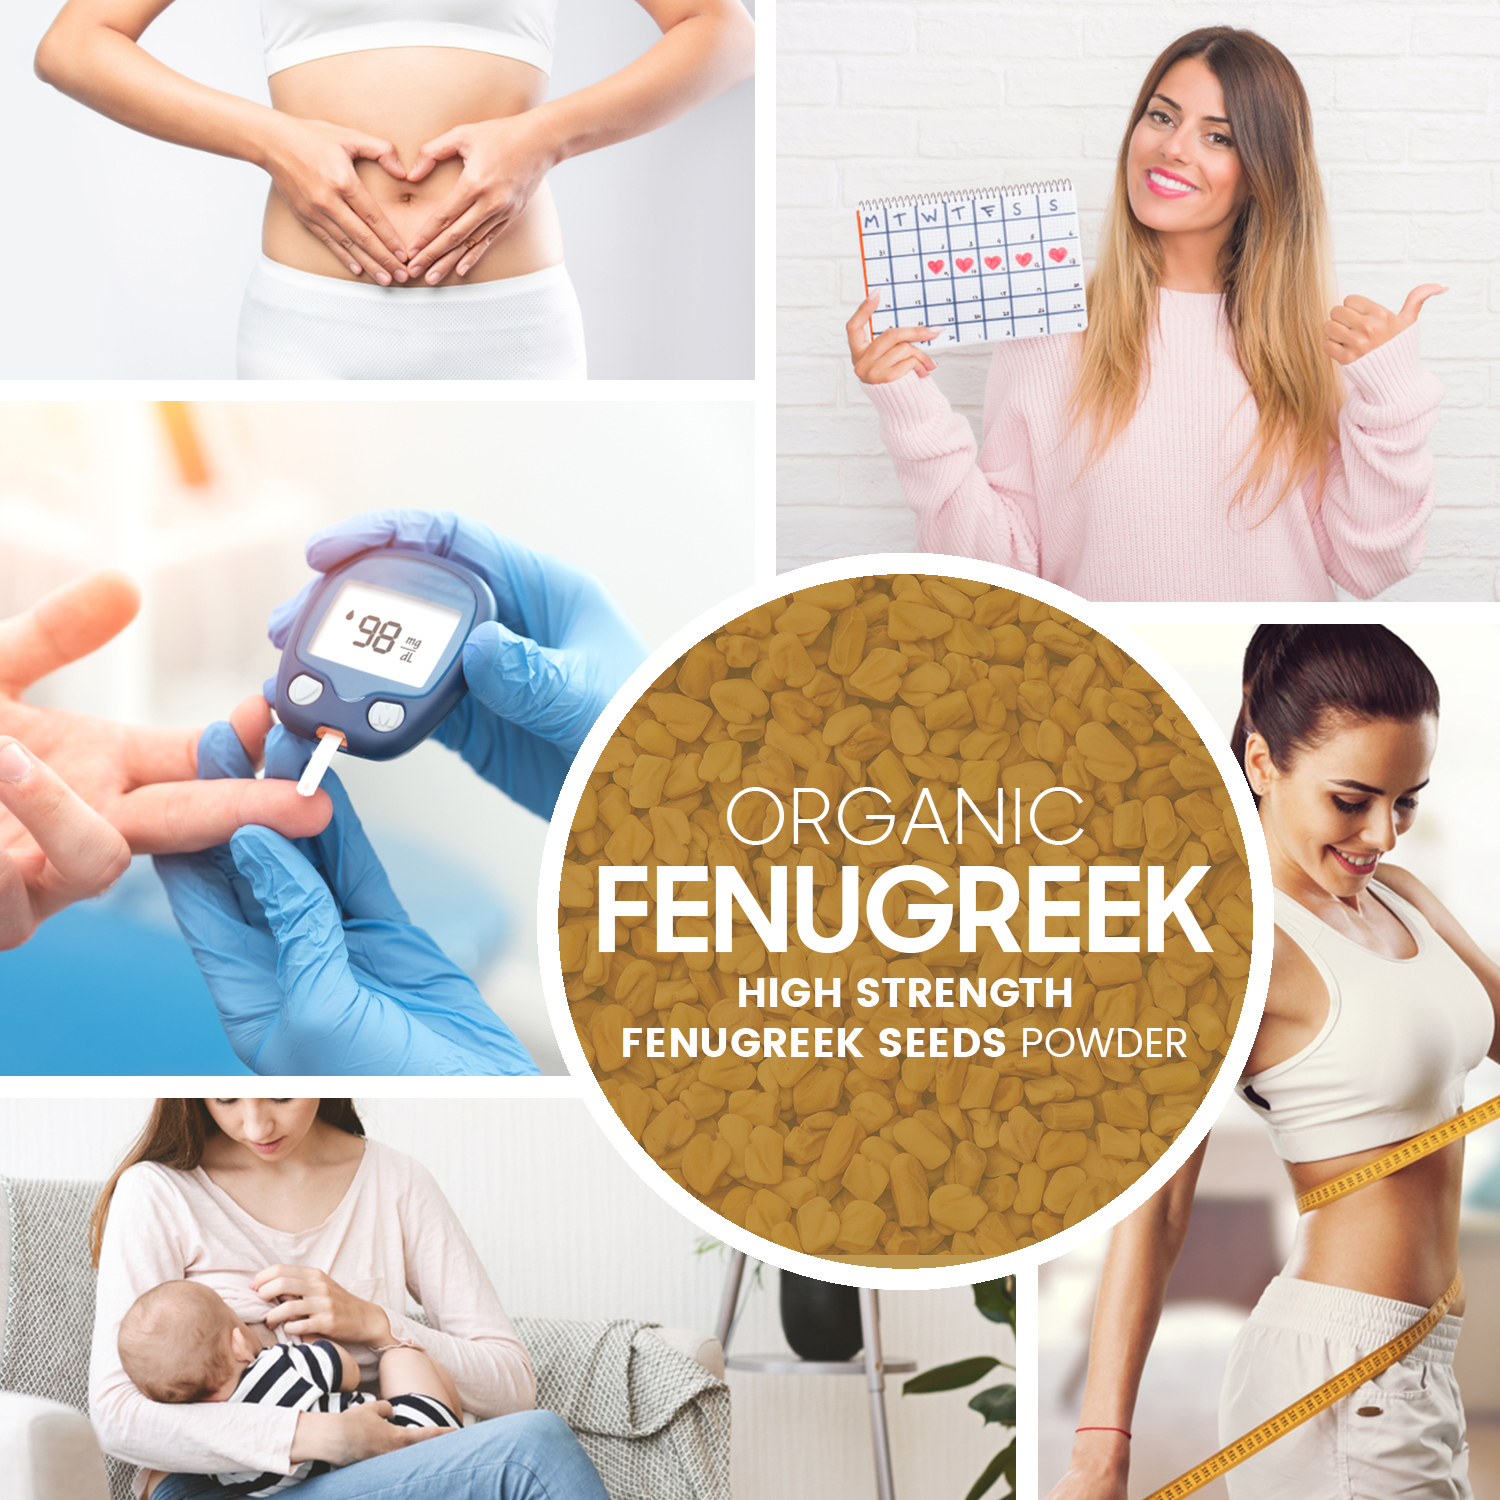 Organic Fenugreek Capsules from EarthBiotics - General Overview